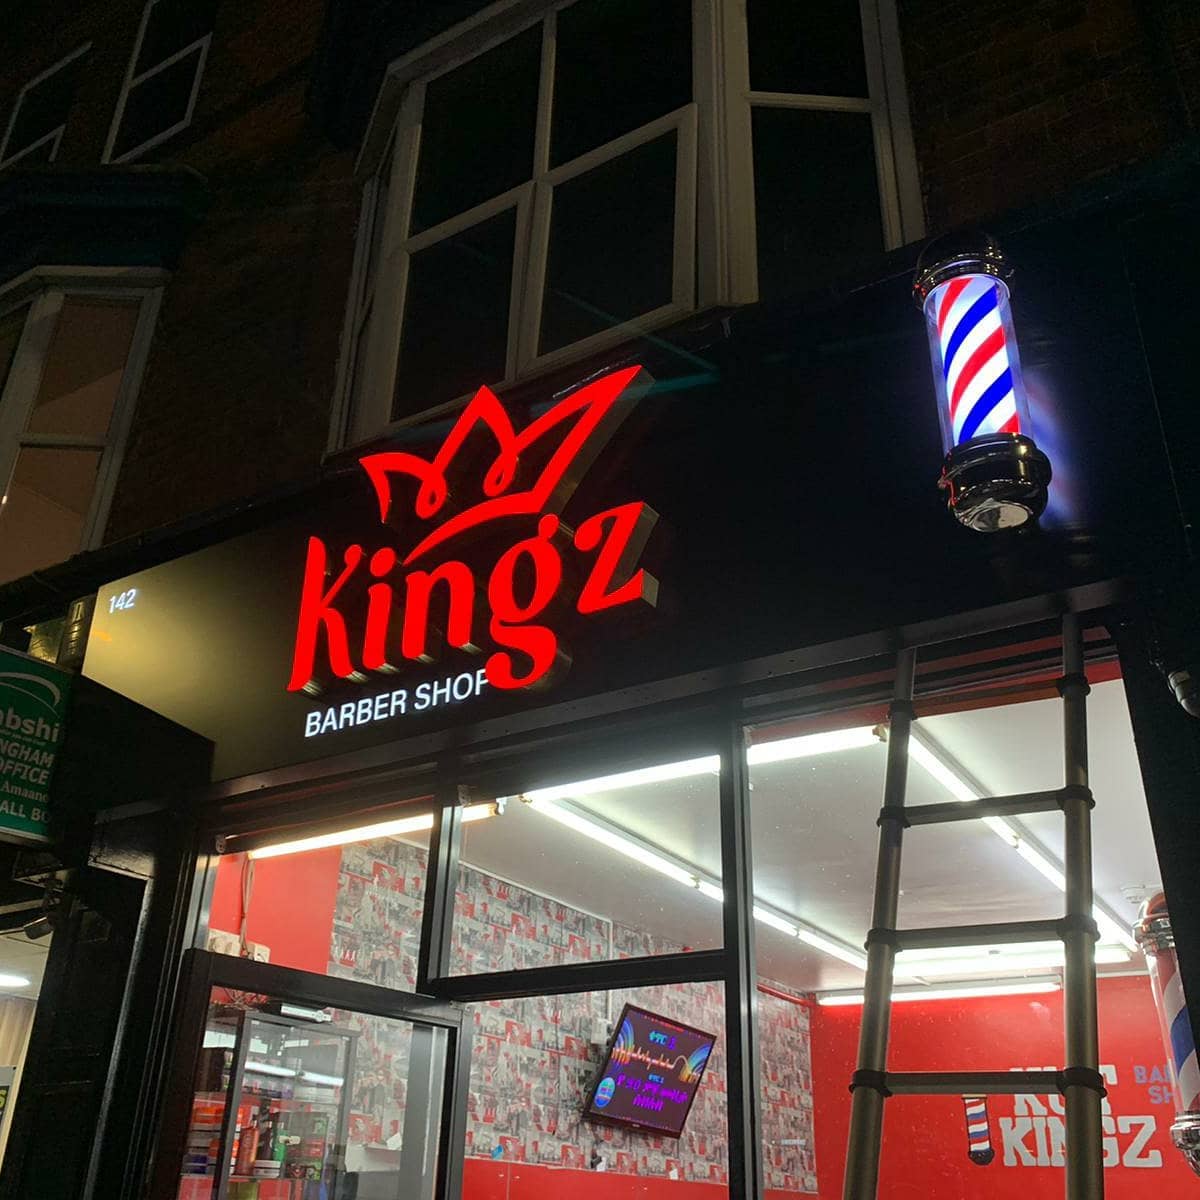 @kingz_barber1 signboard at night like amazing.

To place an order for a 3D signboard, If at all possible PLEASE whatsapp me on 07702153393